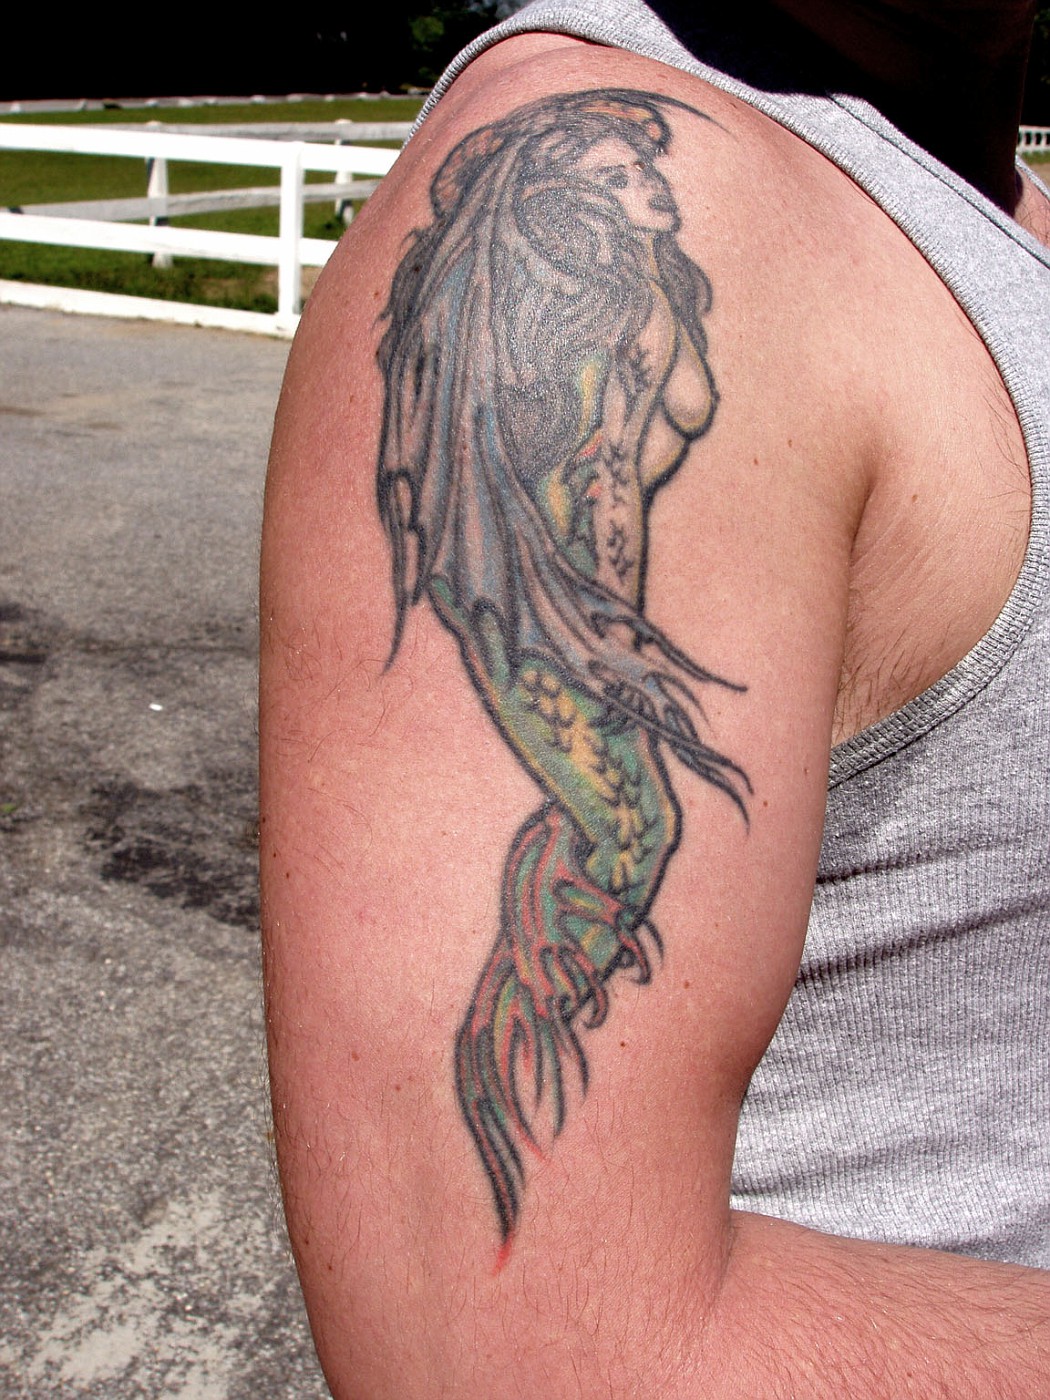 Tattoos Pictures With Beautiful Mermaid Tattoo Designs Art Body Photos